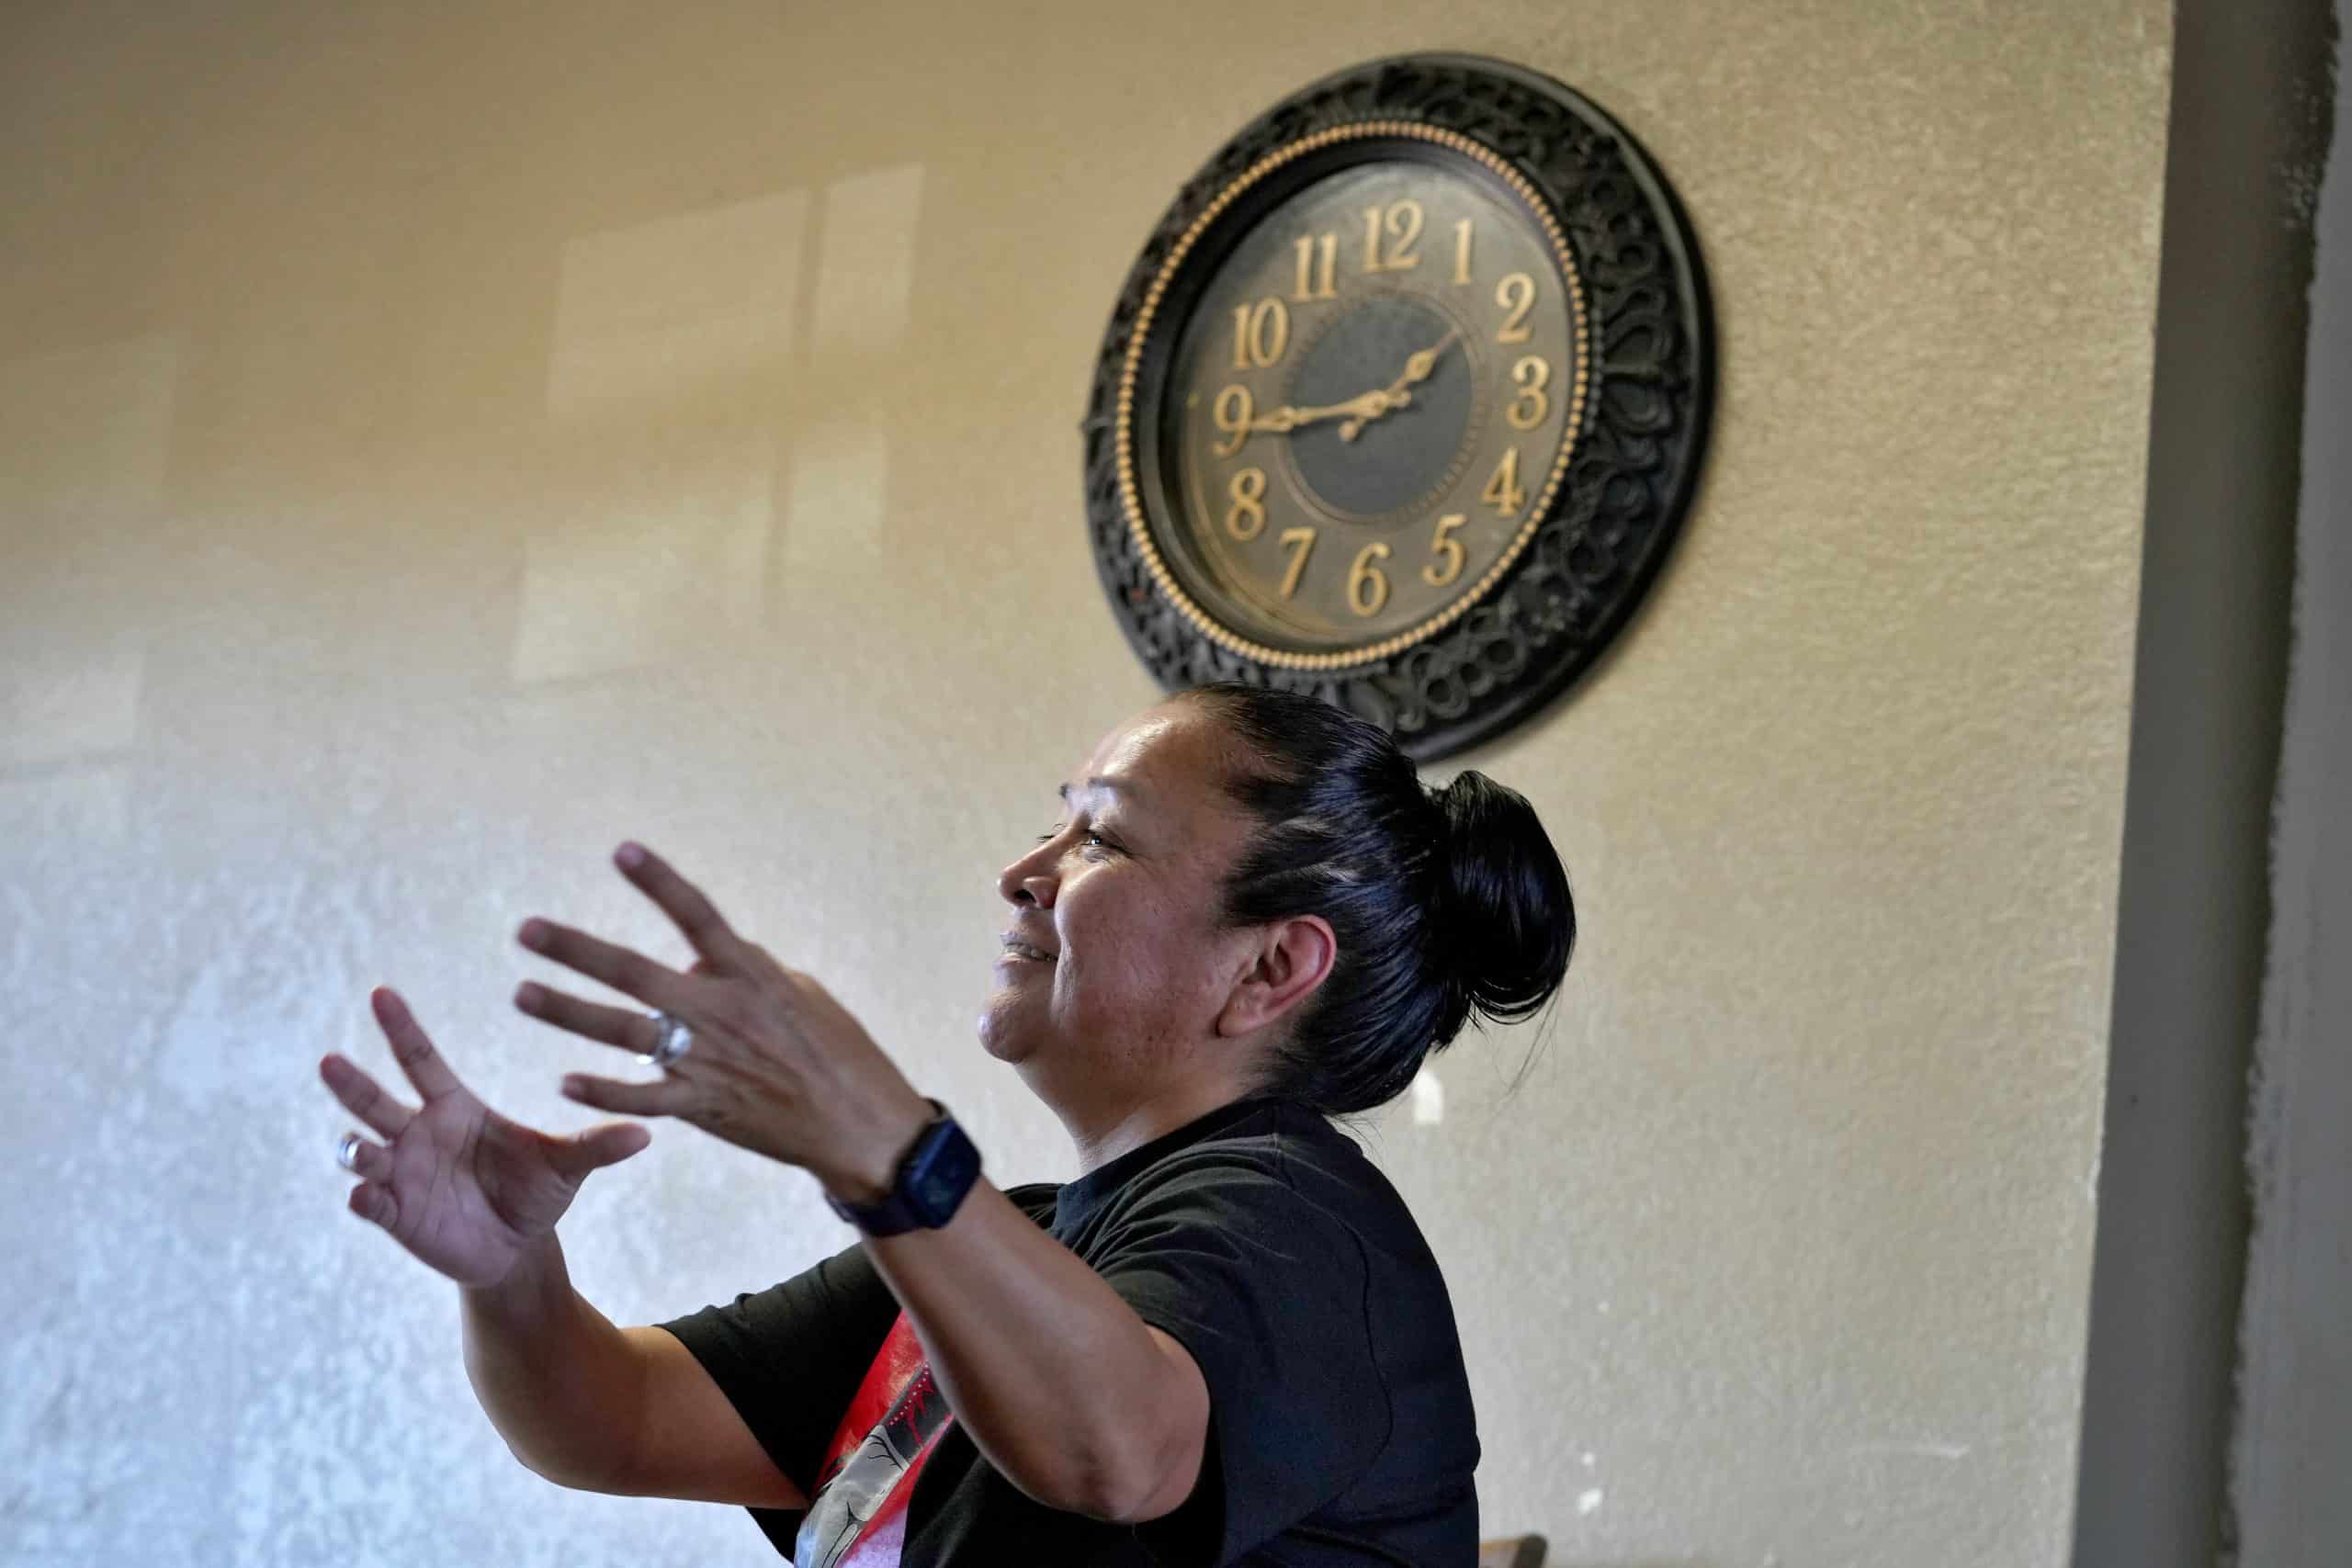 The US is springing forward to daylight saving. For Navajo and Hopi